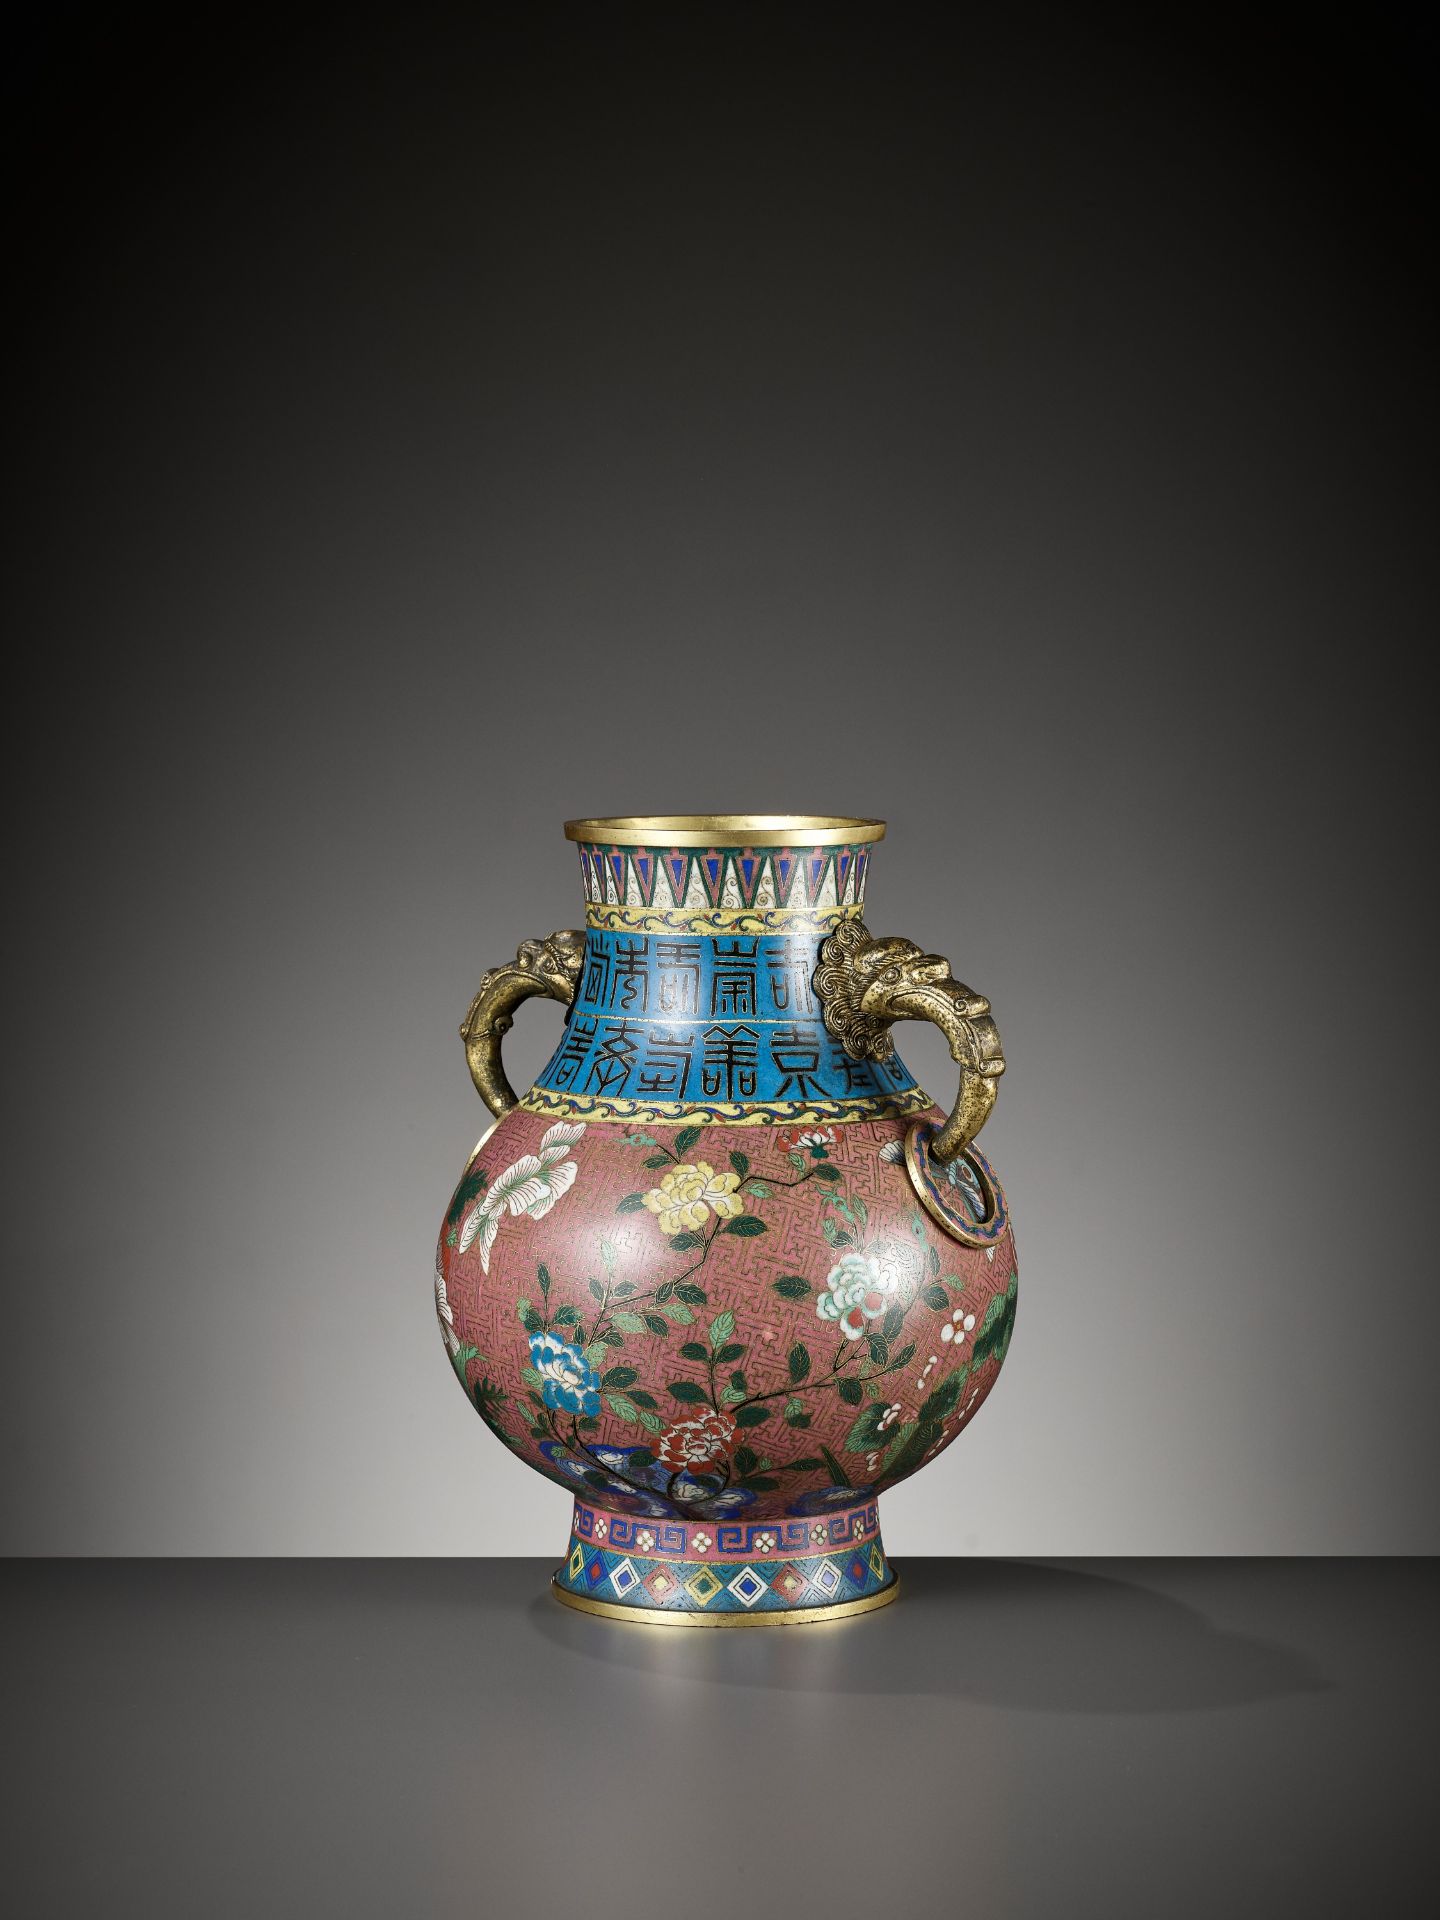 A GILT-BRONZE AND CLOISONNE ENAMEL 'CRICKET' VASE, HU, JIAQING PERIOD - Image 10 of 14